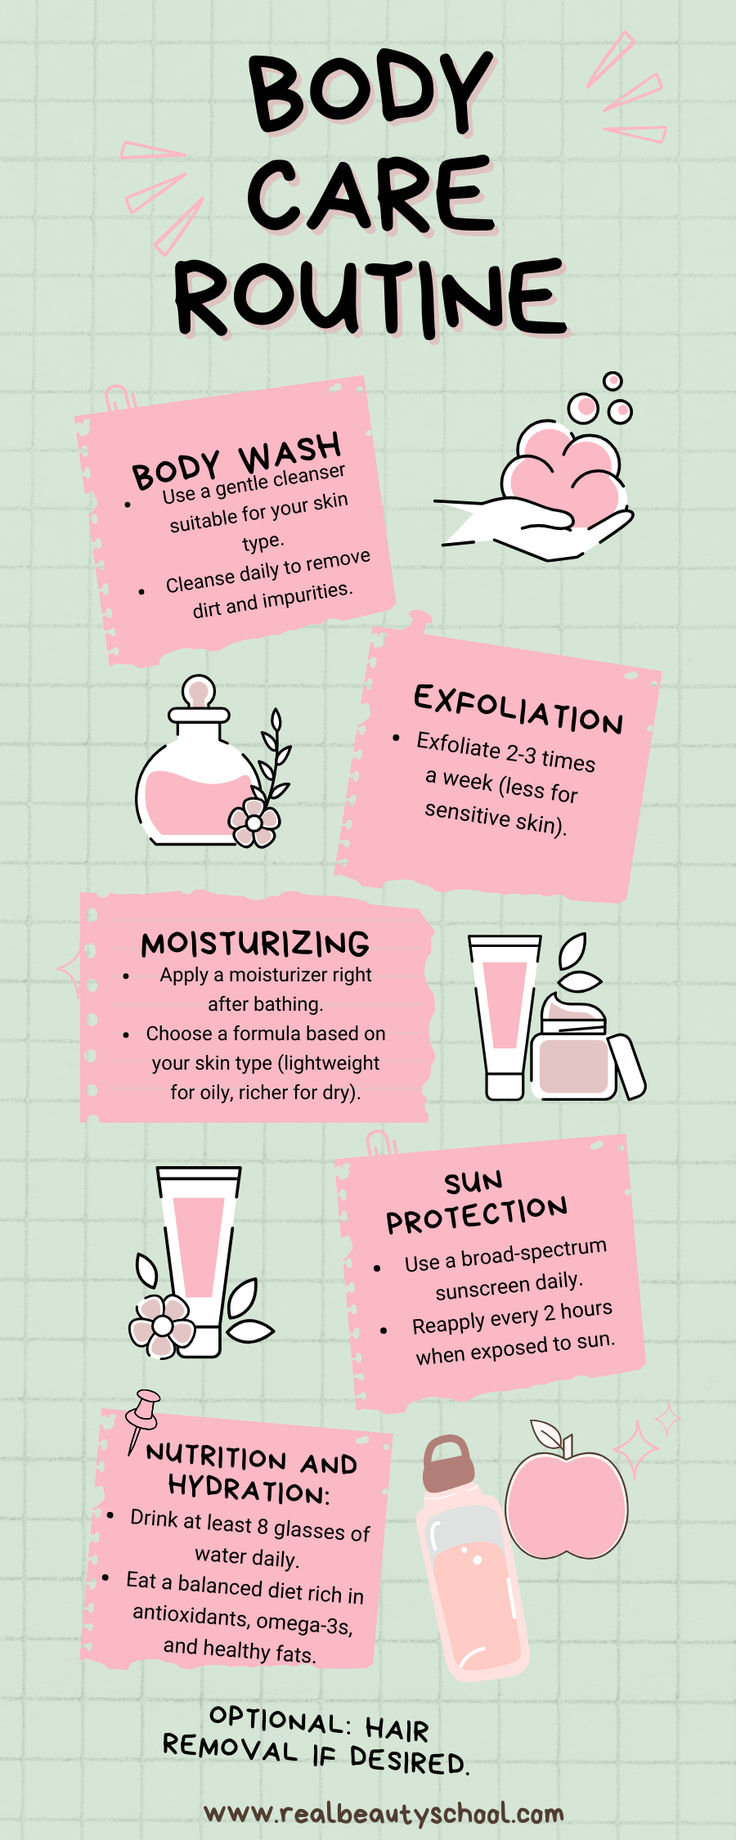 body care routine step by step Perfect Body Skin, Glowing Body Skin, Routine For Glowing Skin, Beginner Skin Care Routine, Skin Care Routine Order, Face Care Routine, Basic Skin Care Routine, Diy Skin Care Recipes, Simple Skincare Routine